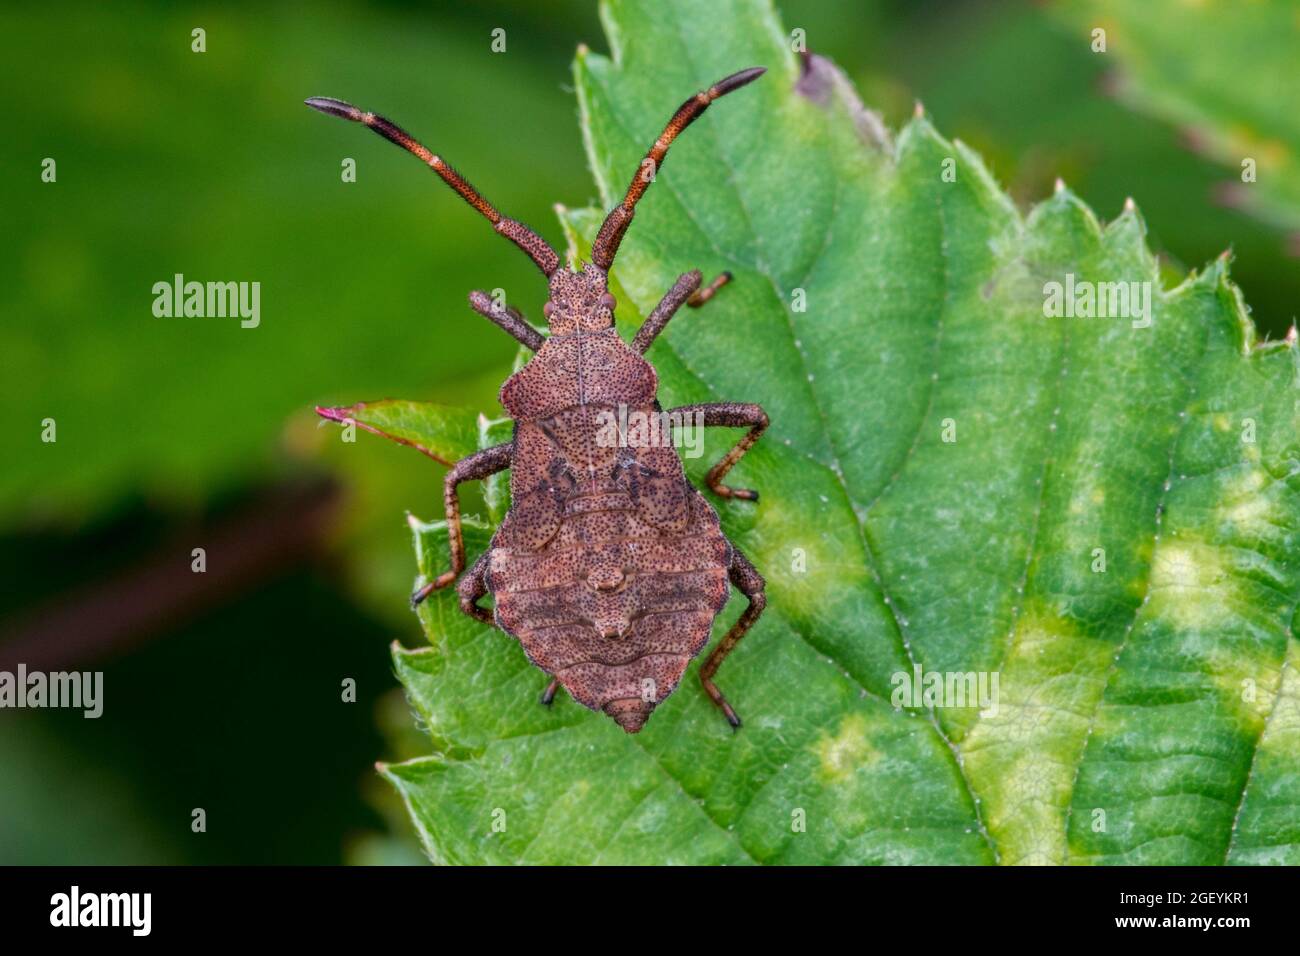 Dock bug (Coreus marginatus) older nymph with distinct abdominal scent glands and visible wingbuds (developing wings) on leaf in summer Stock Photo